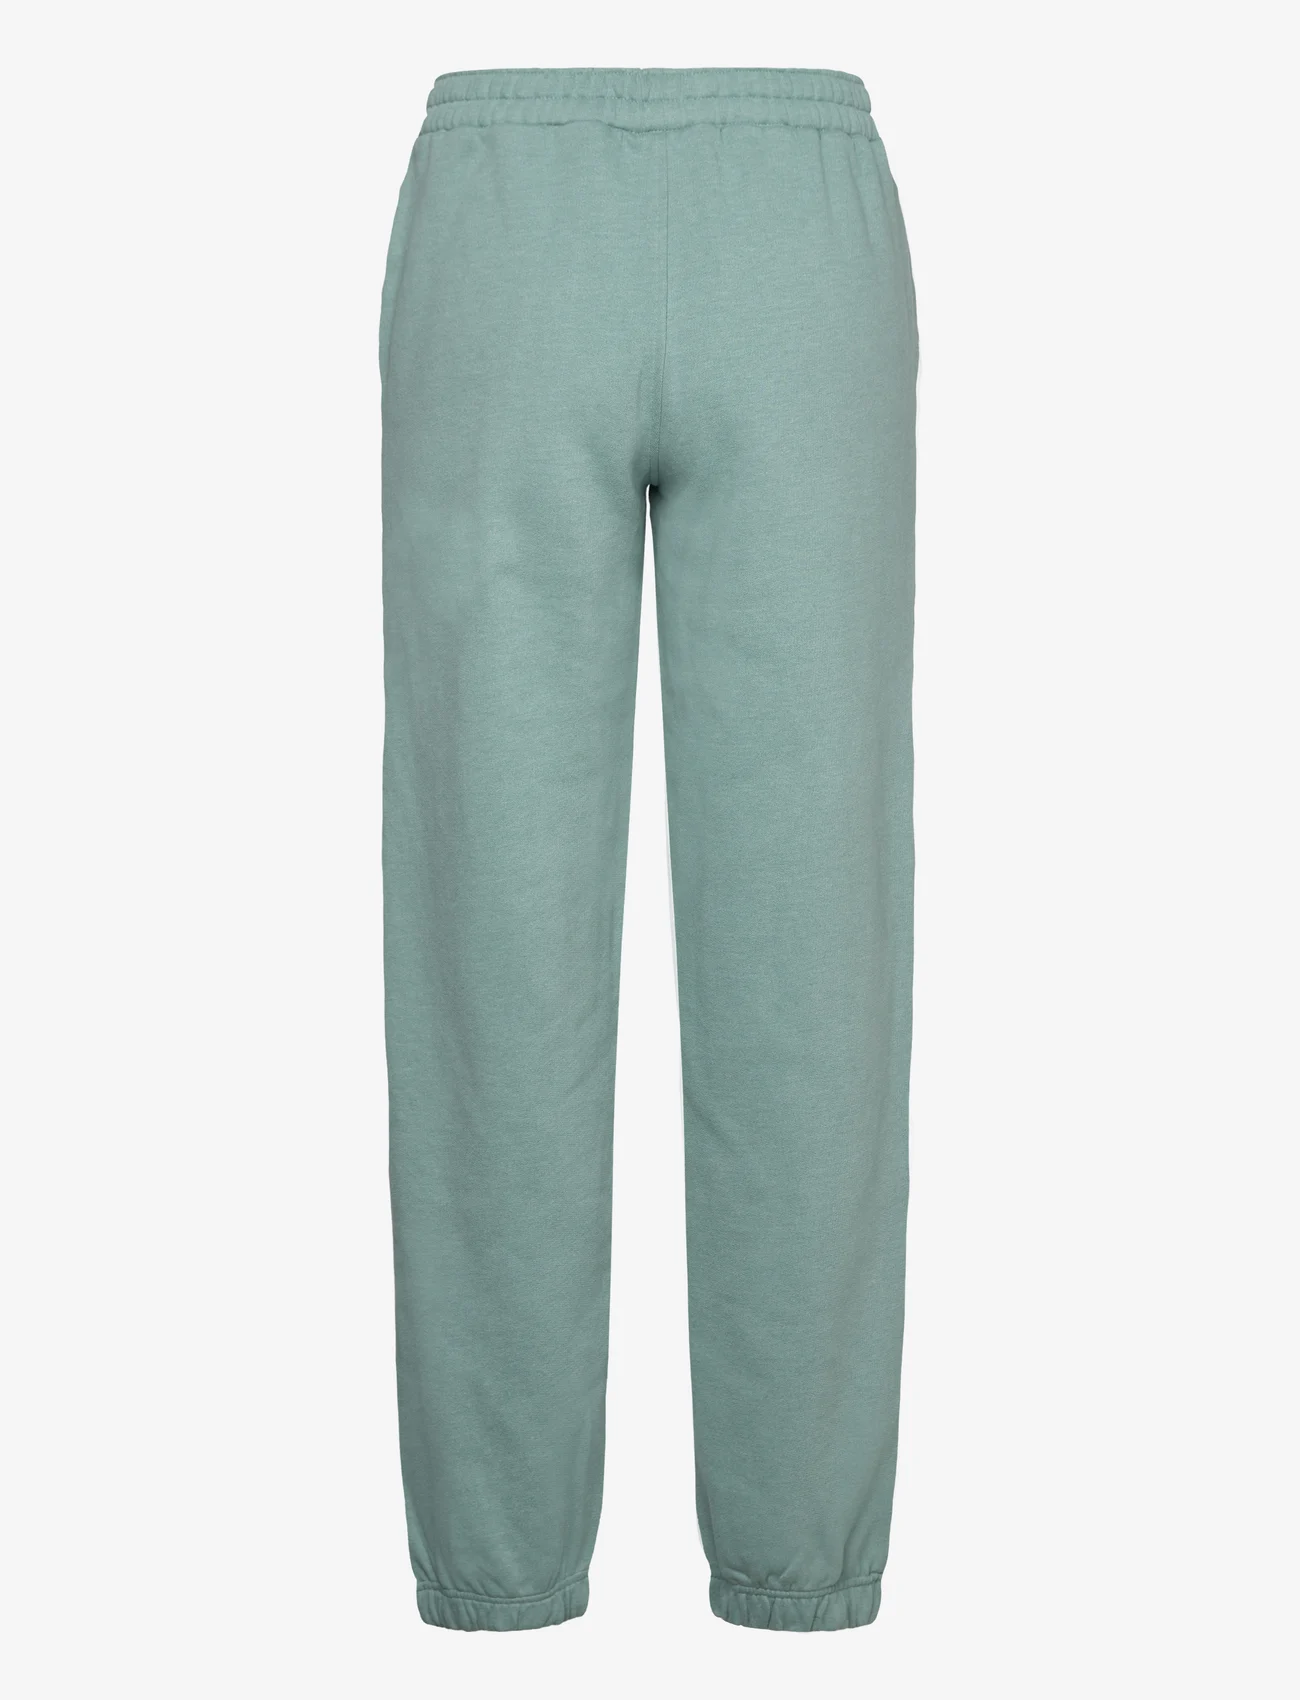 HOLZWEILER - Hailey Emboss Trousers - sweatpants - teal - 1